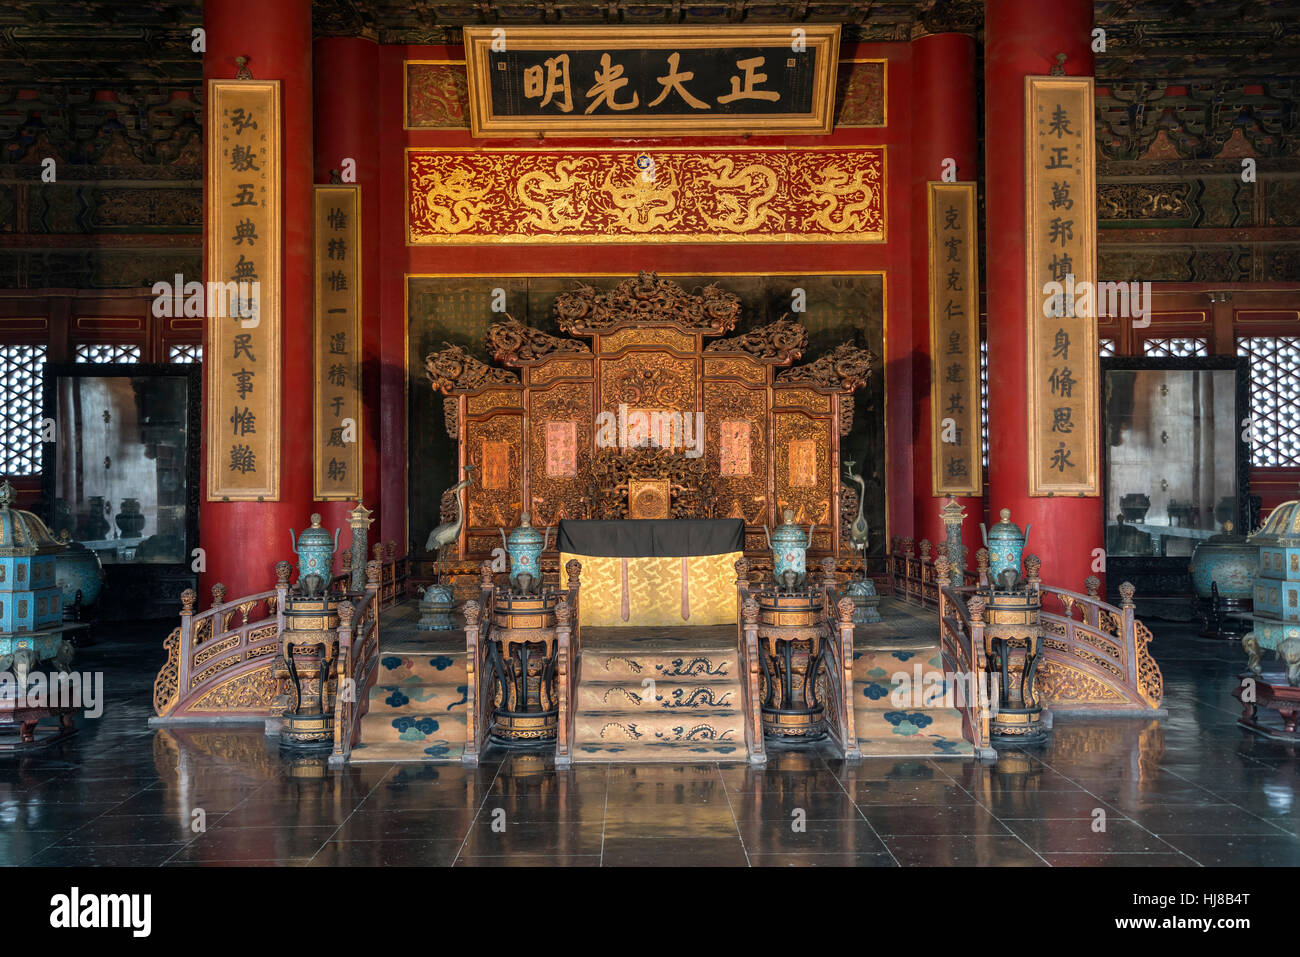 Throne in the Palace of Heavenly Purity, Forbidden City, Beijing, China Stock Photo